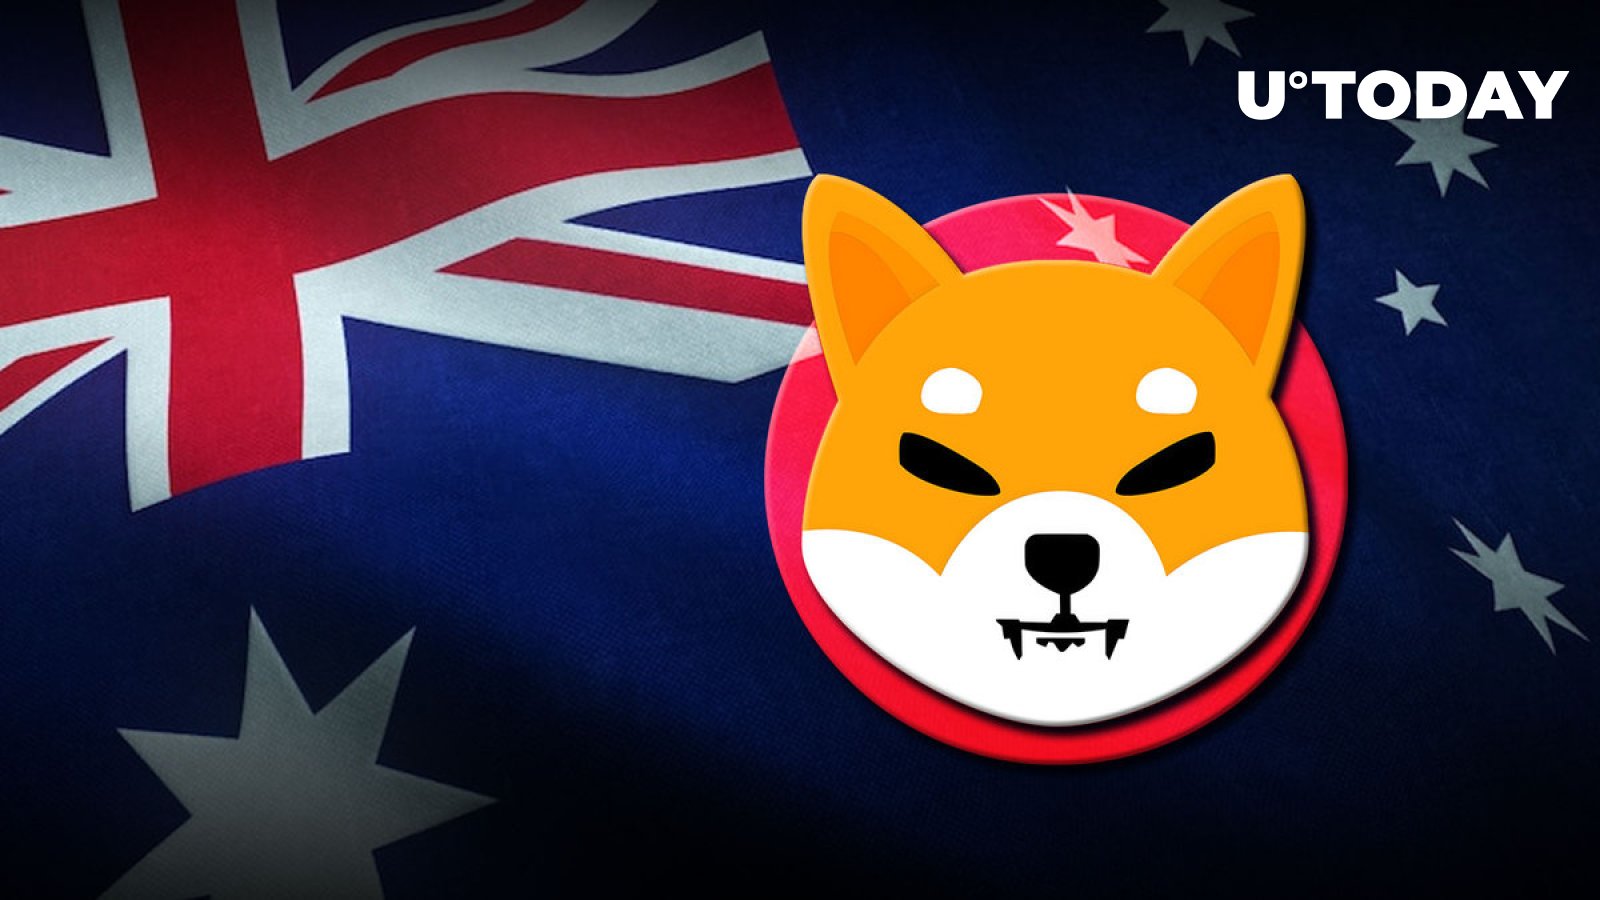 Long-Awaited Shiba Inu Game Launched in Australia, Fans Say It Would Just Make Money on SHIB Name